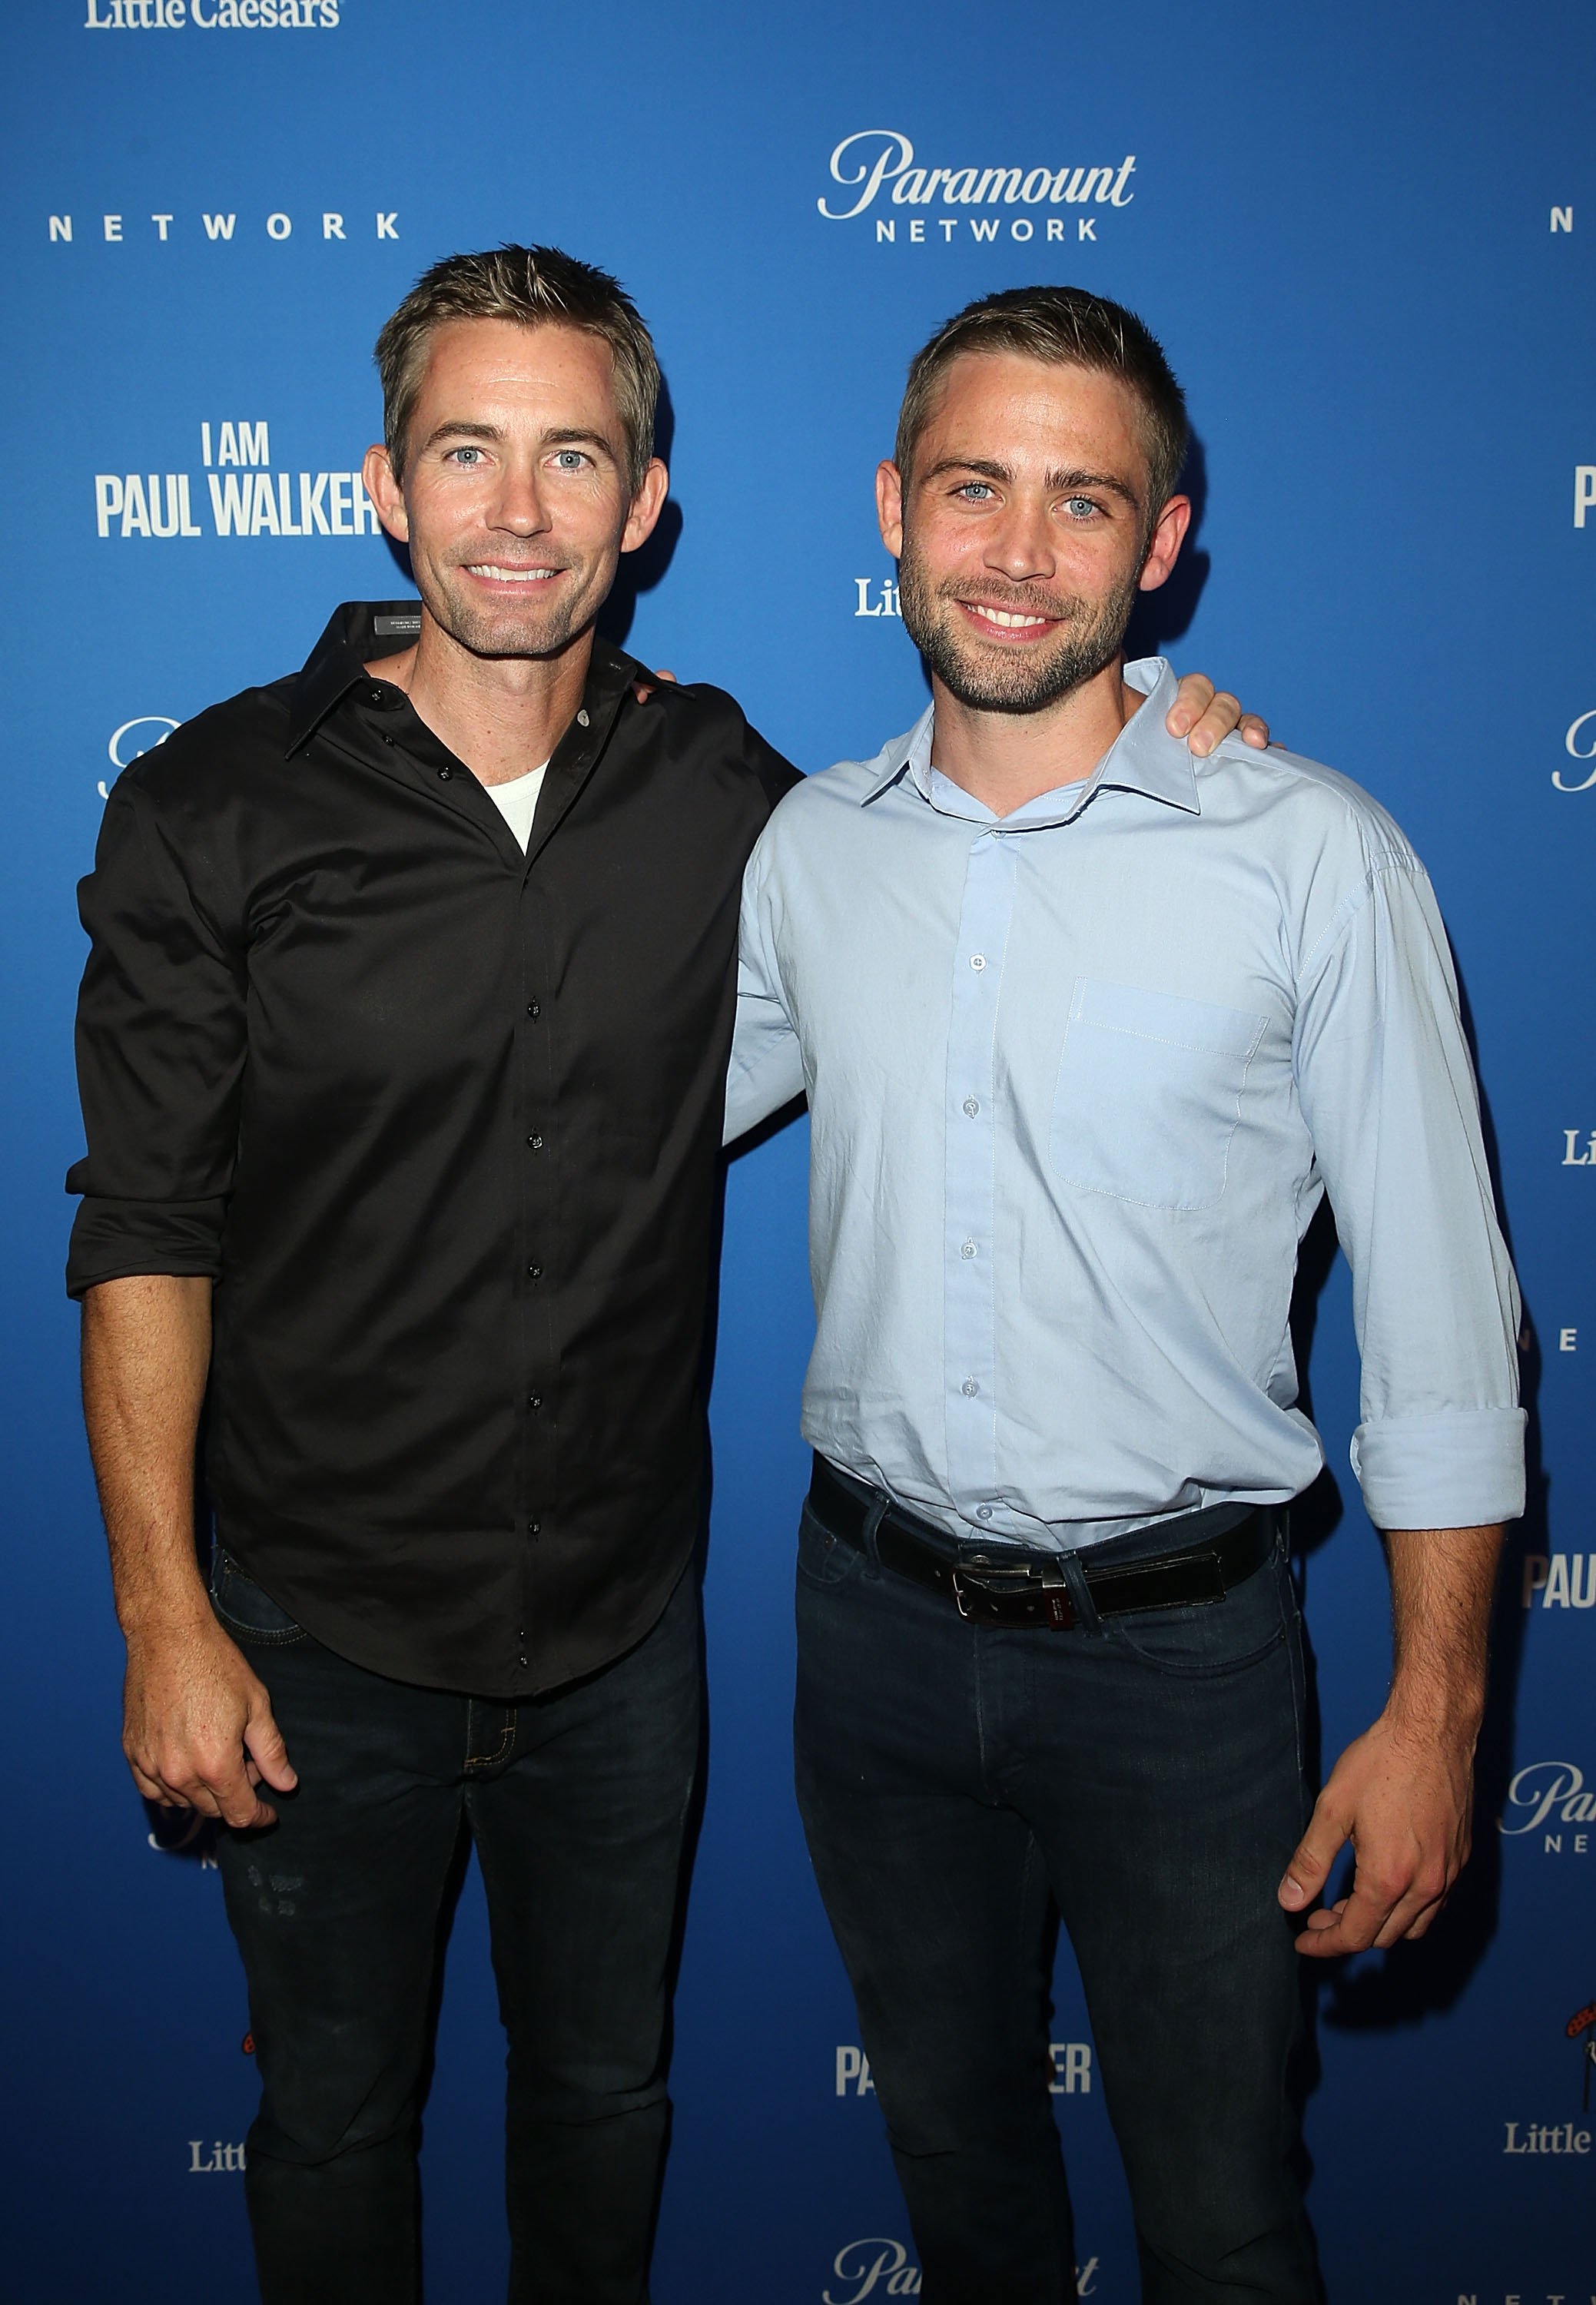 Caleb and Cody Walker attend the Paramount Network World Premiere of "I Am Paul Walker" on August 7, 2018, in West Hollywood, California. | Source: Getty Images